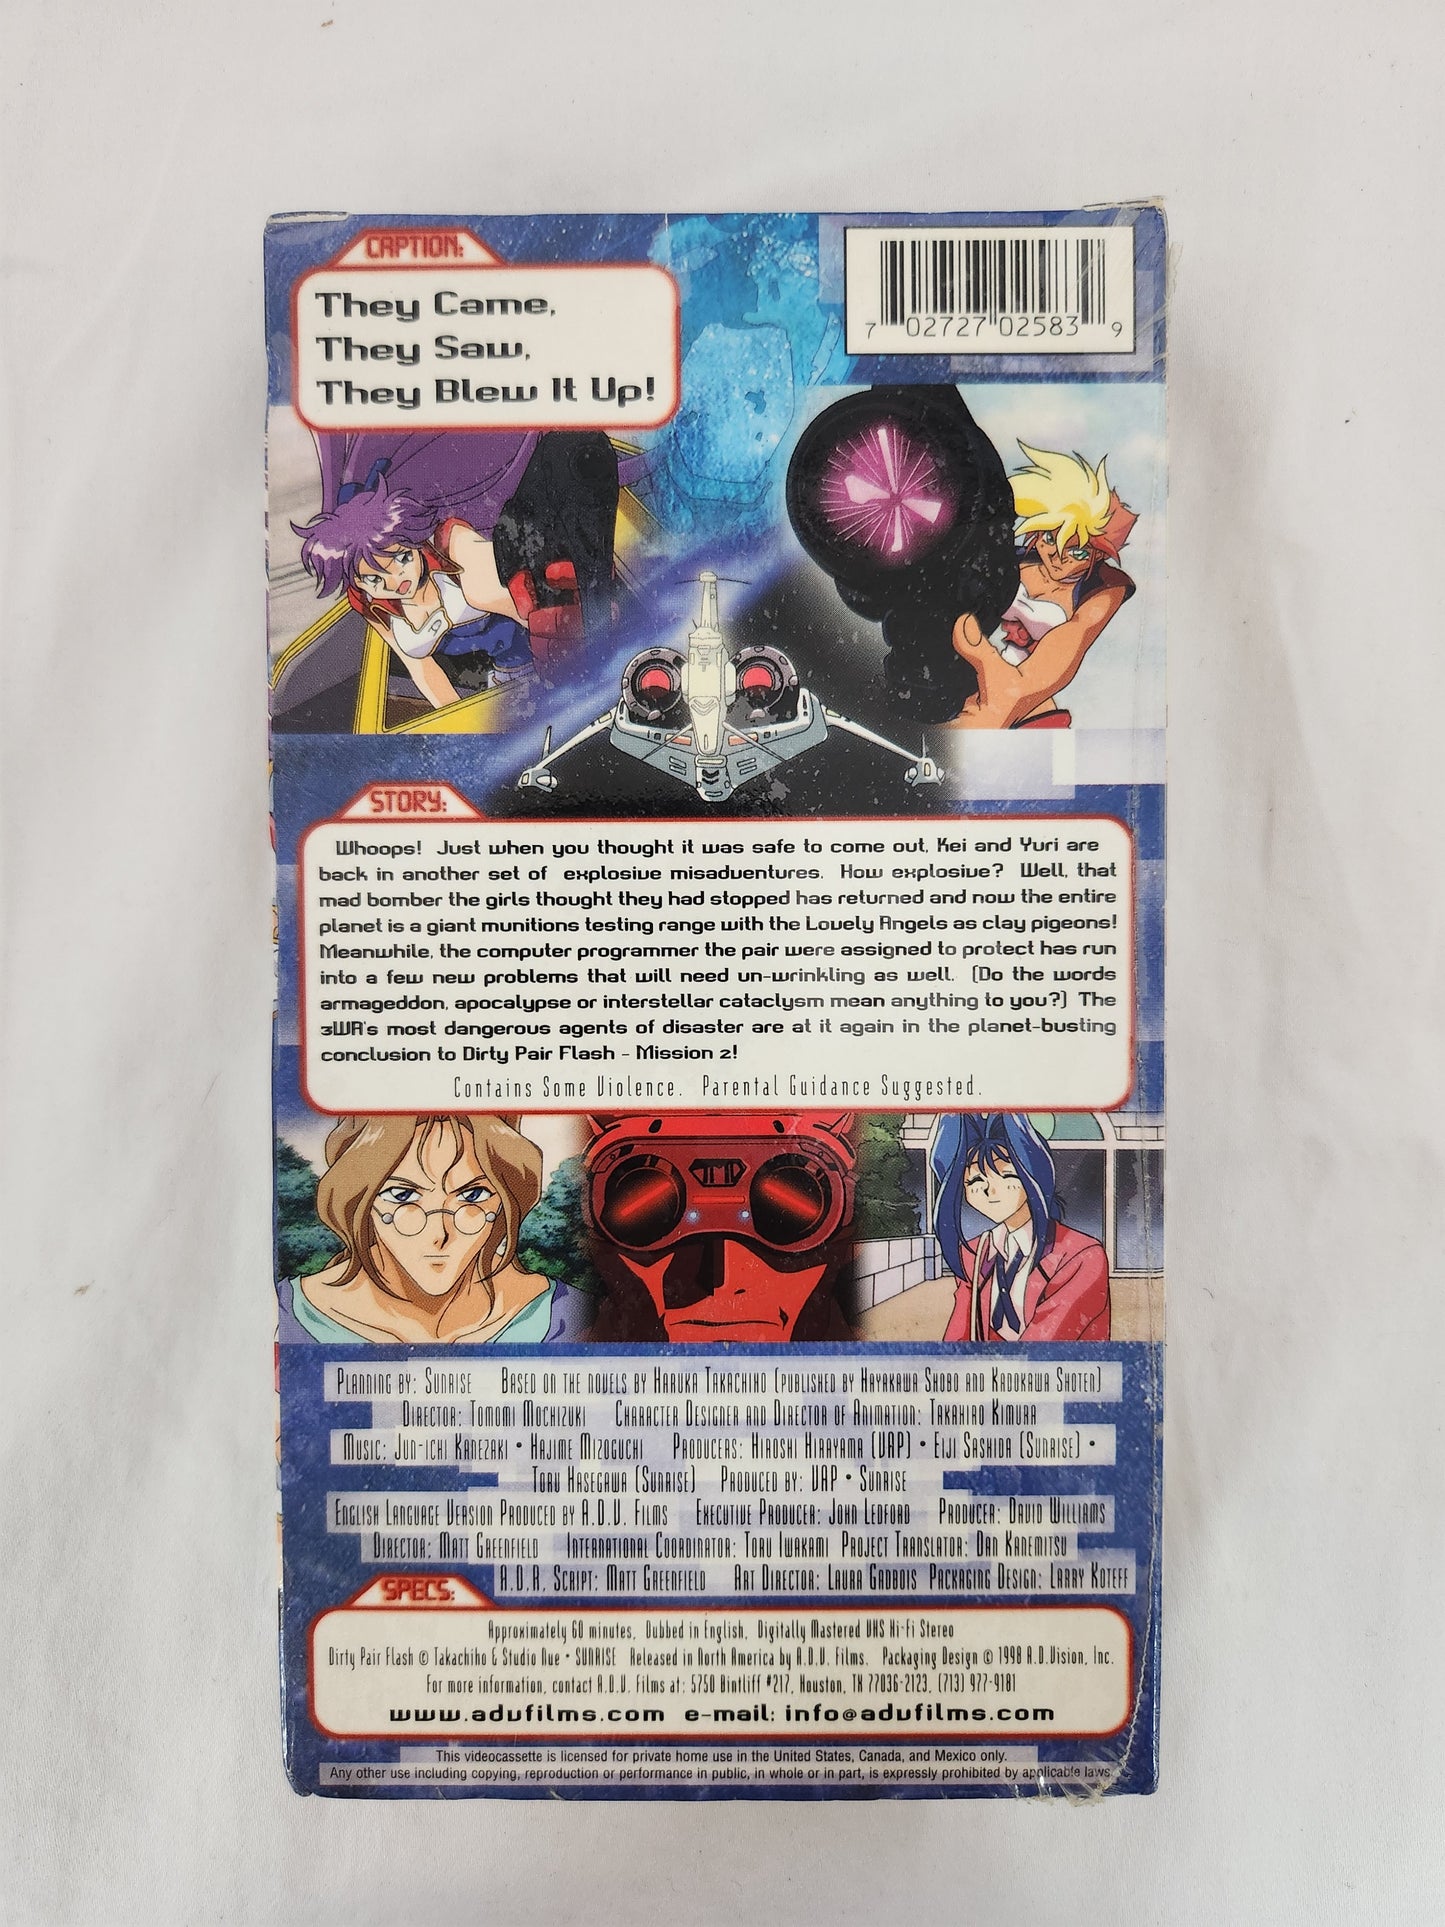 1990's Anime (English Dubbed) VHS Tapes - Set of 3 Factory Sealed